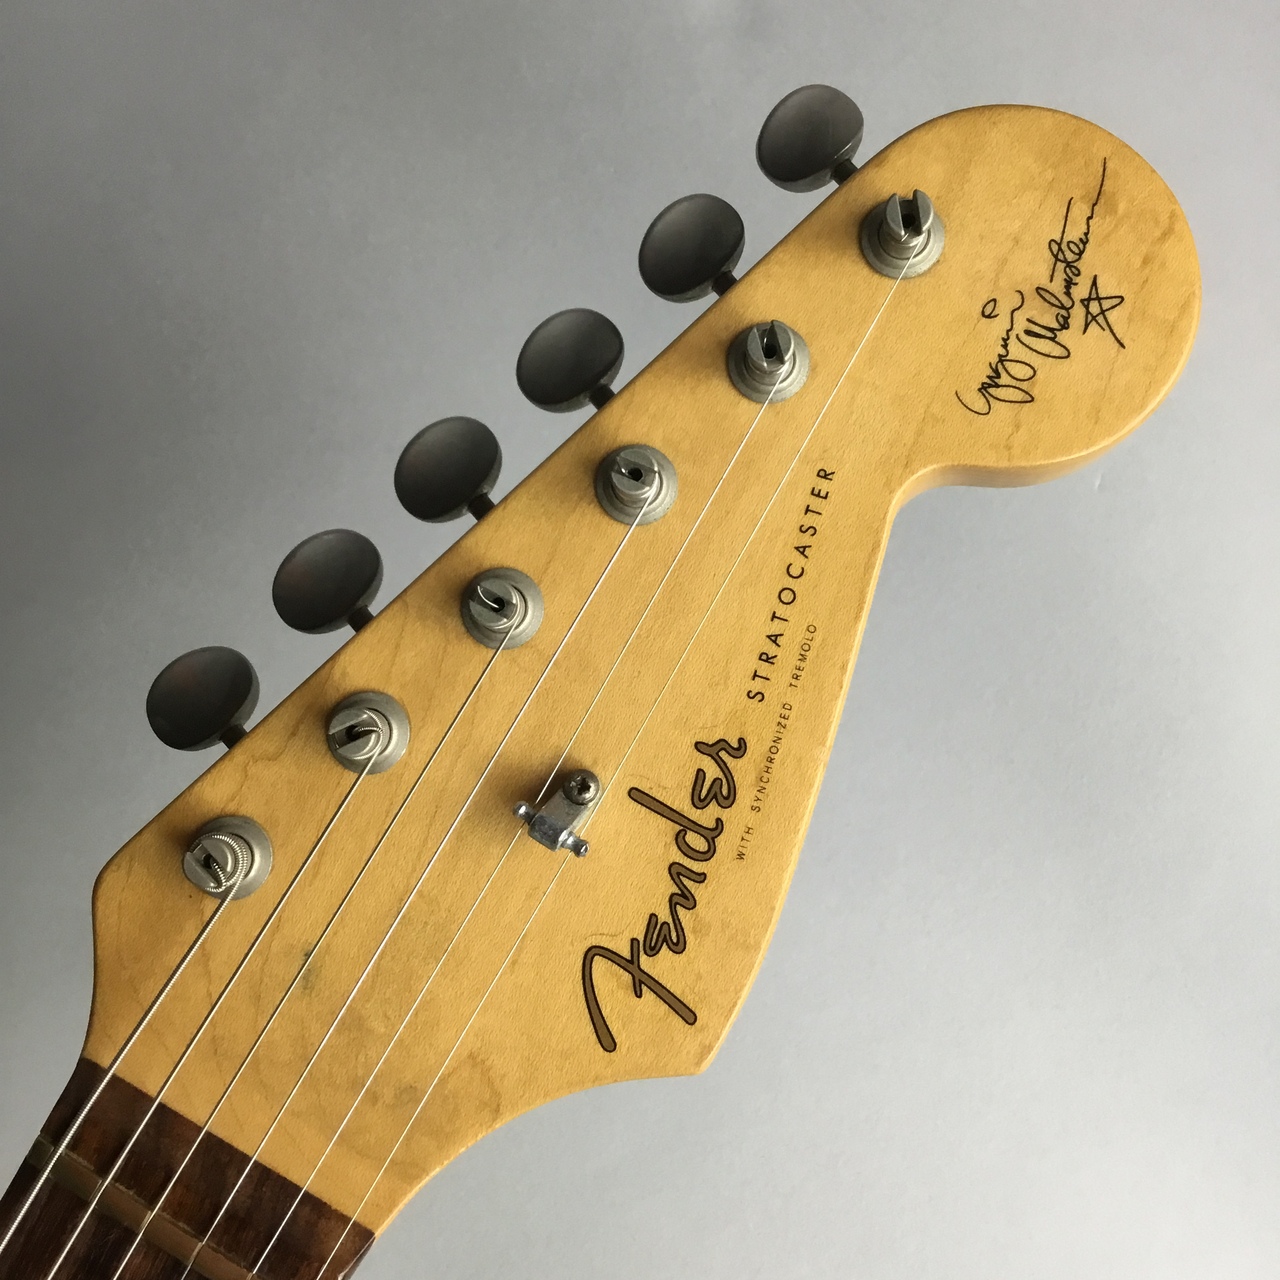 USED】ローズ指板のFender Yngwie Malmsteen Stratocaster Vintage